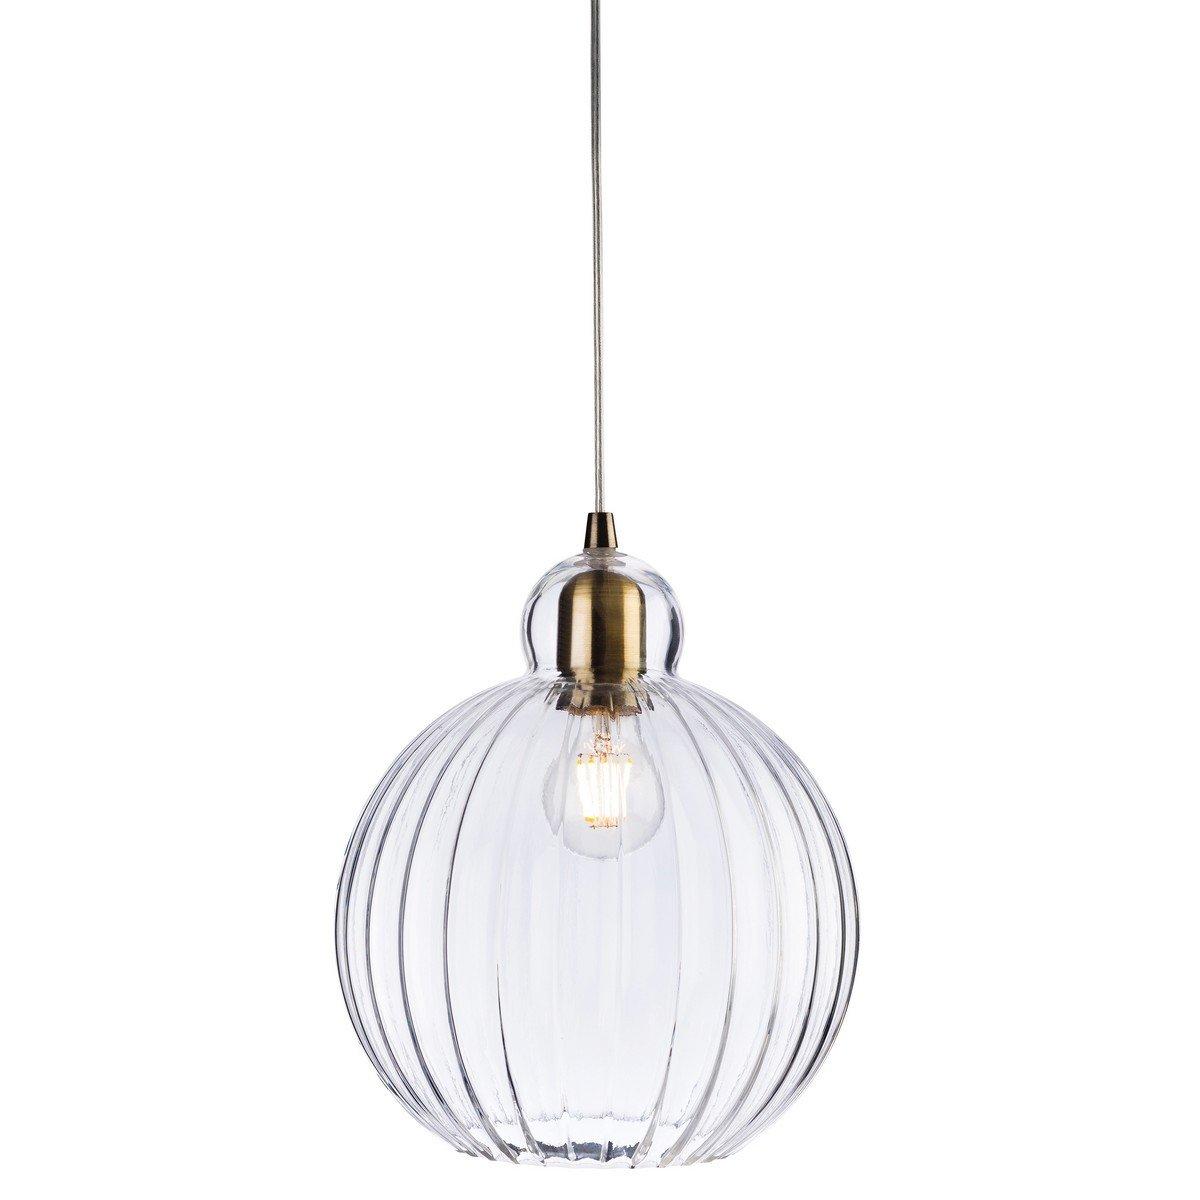 Victory 1 Light Globe Ceiling Pendant Antique Brass Clear Glass E27